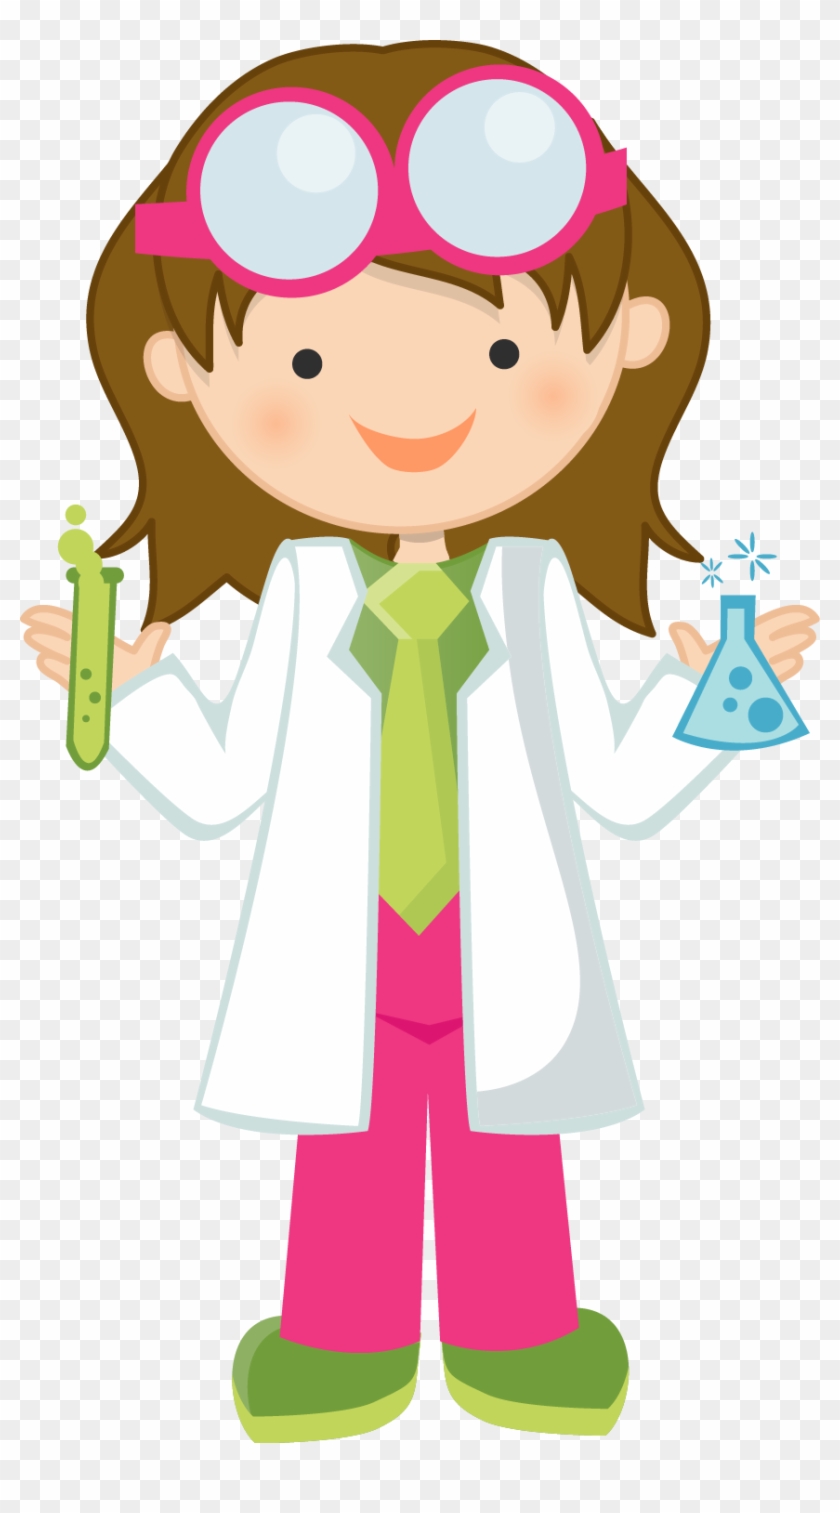 Clip Arts Related To - Girl Scientist Png #313248